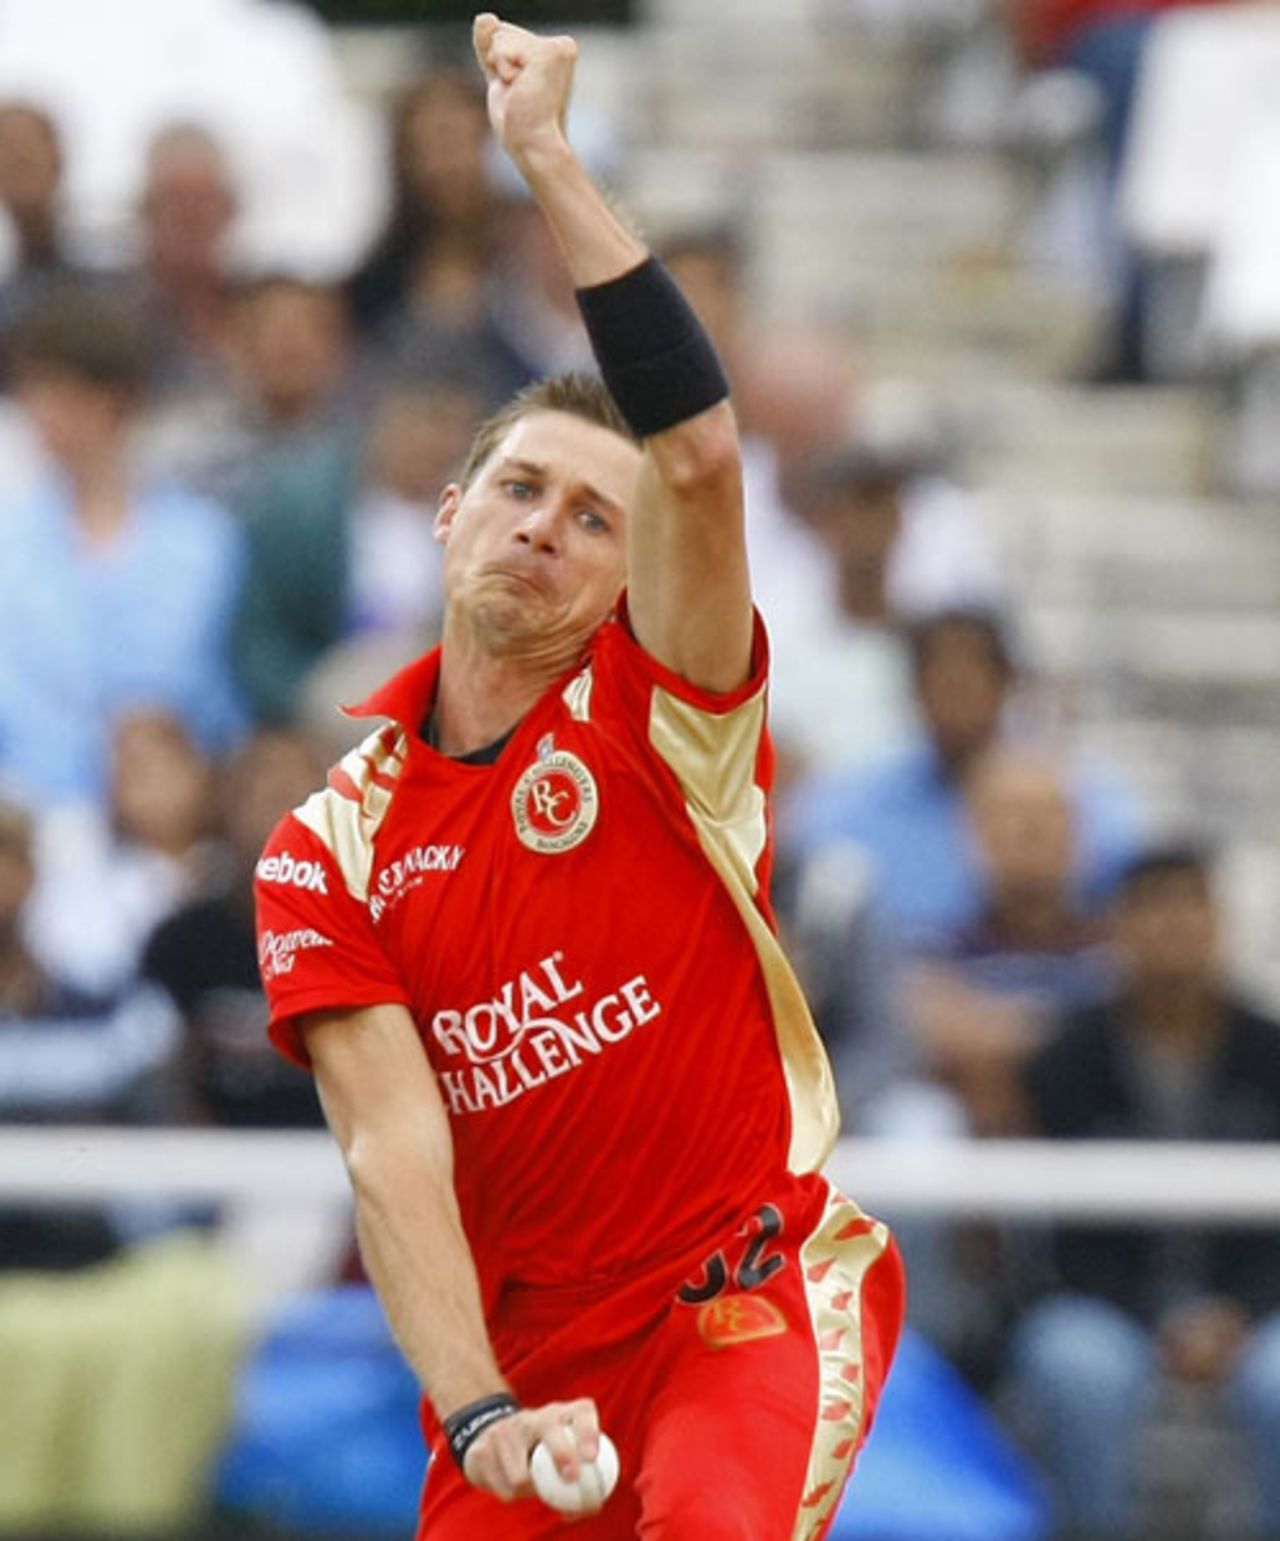 Dale Steyn steams in, Bangalore Royal Challengers v Deccan Chargers, IPL, Newlands, April 22 2009